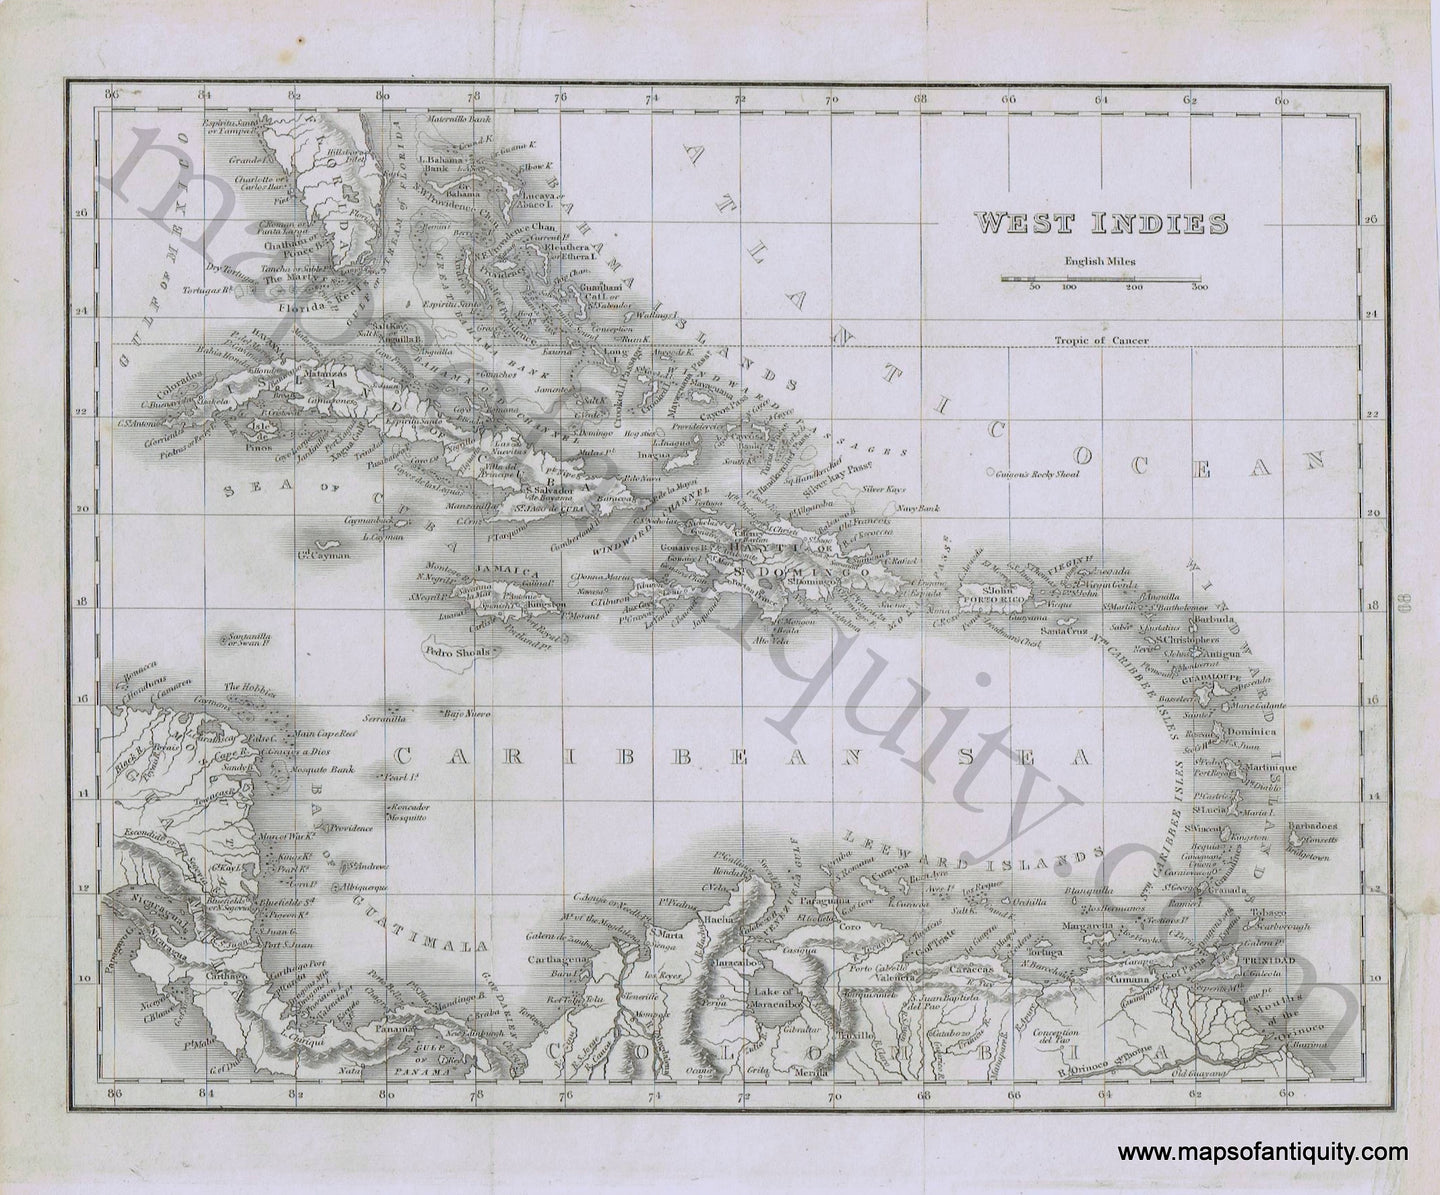 Antique-Black-and-White-Print-Caribbean-West-Indies-early-19th-century-unknown--1800s-19th-century-Maps-of-Antiquity